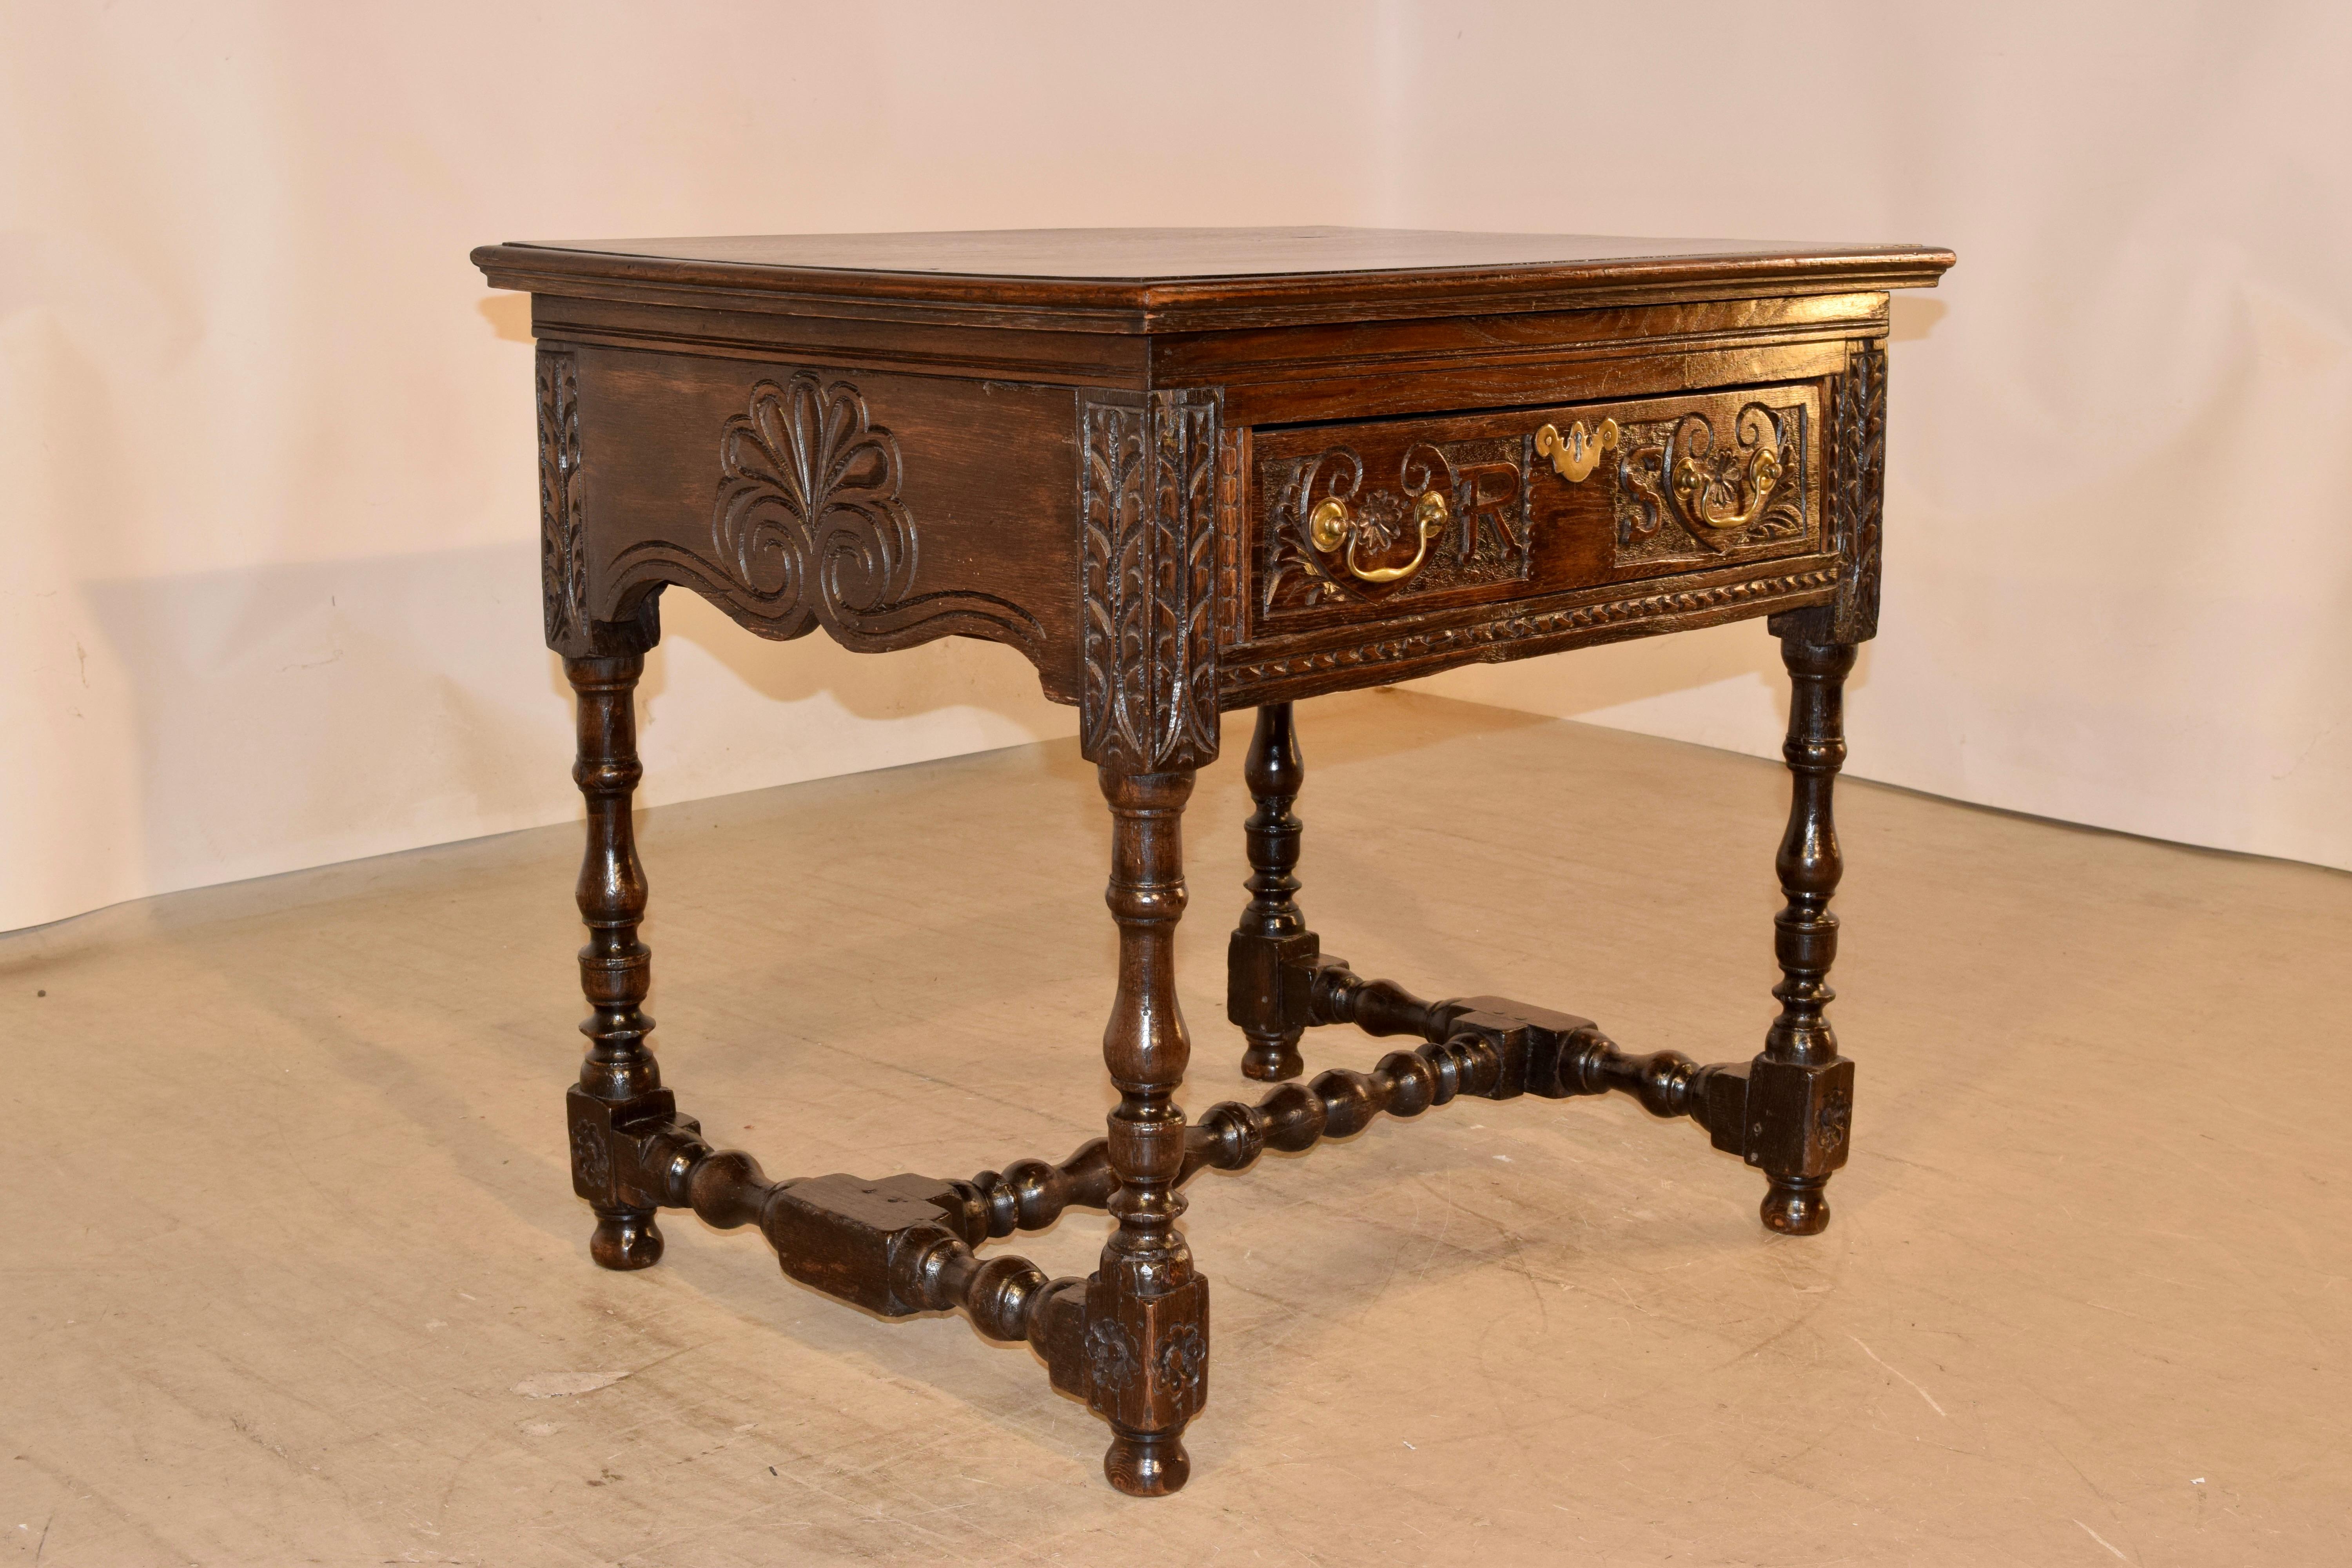 18th century oak side table from England with a three plank top with beveled edges, following down to hand carved decorated and scalloped sides, and containing a single drawer in the front, also with wonderful carved decoration and the initials RS.